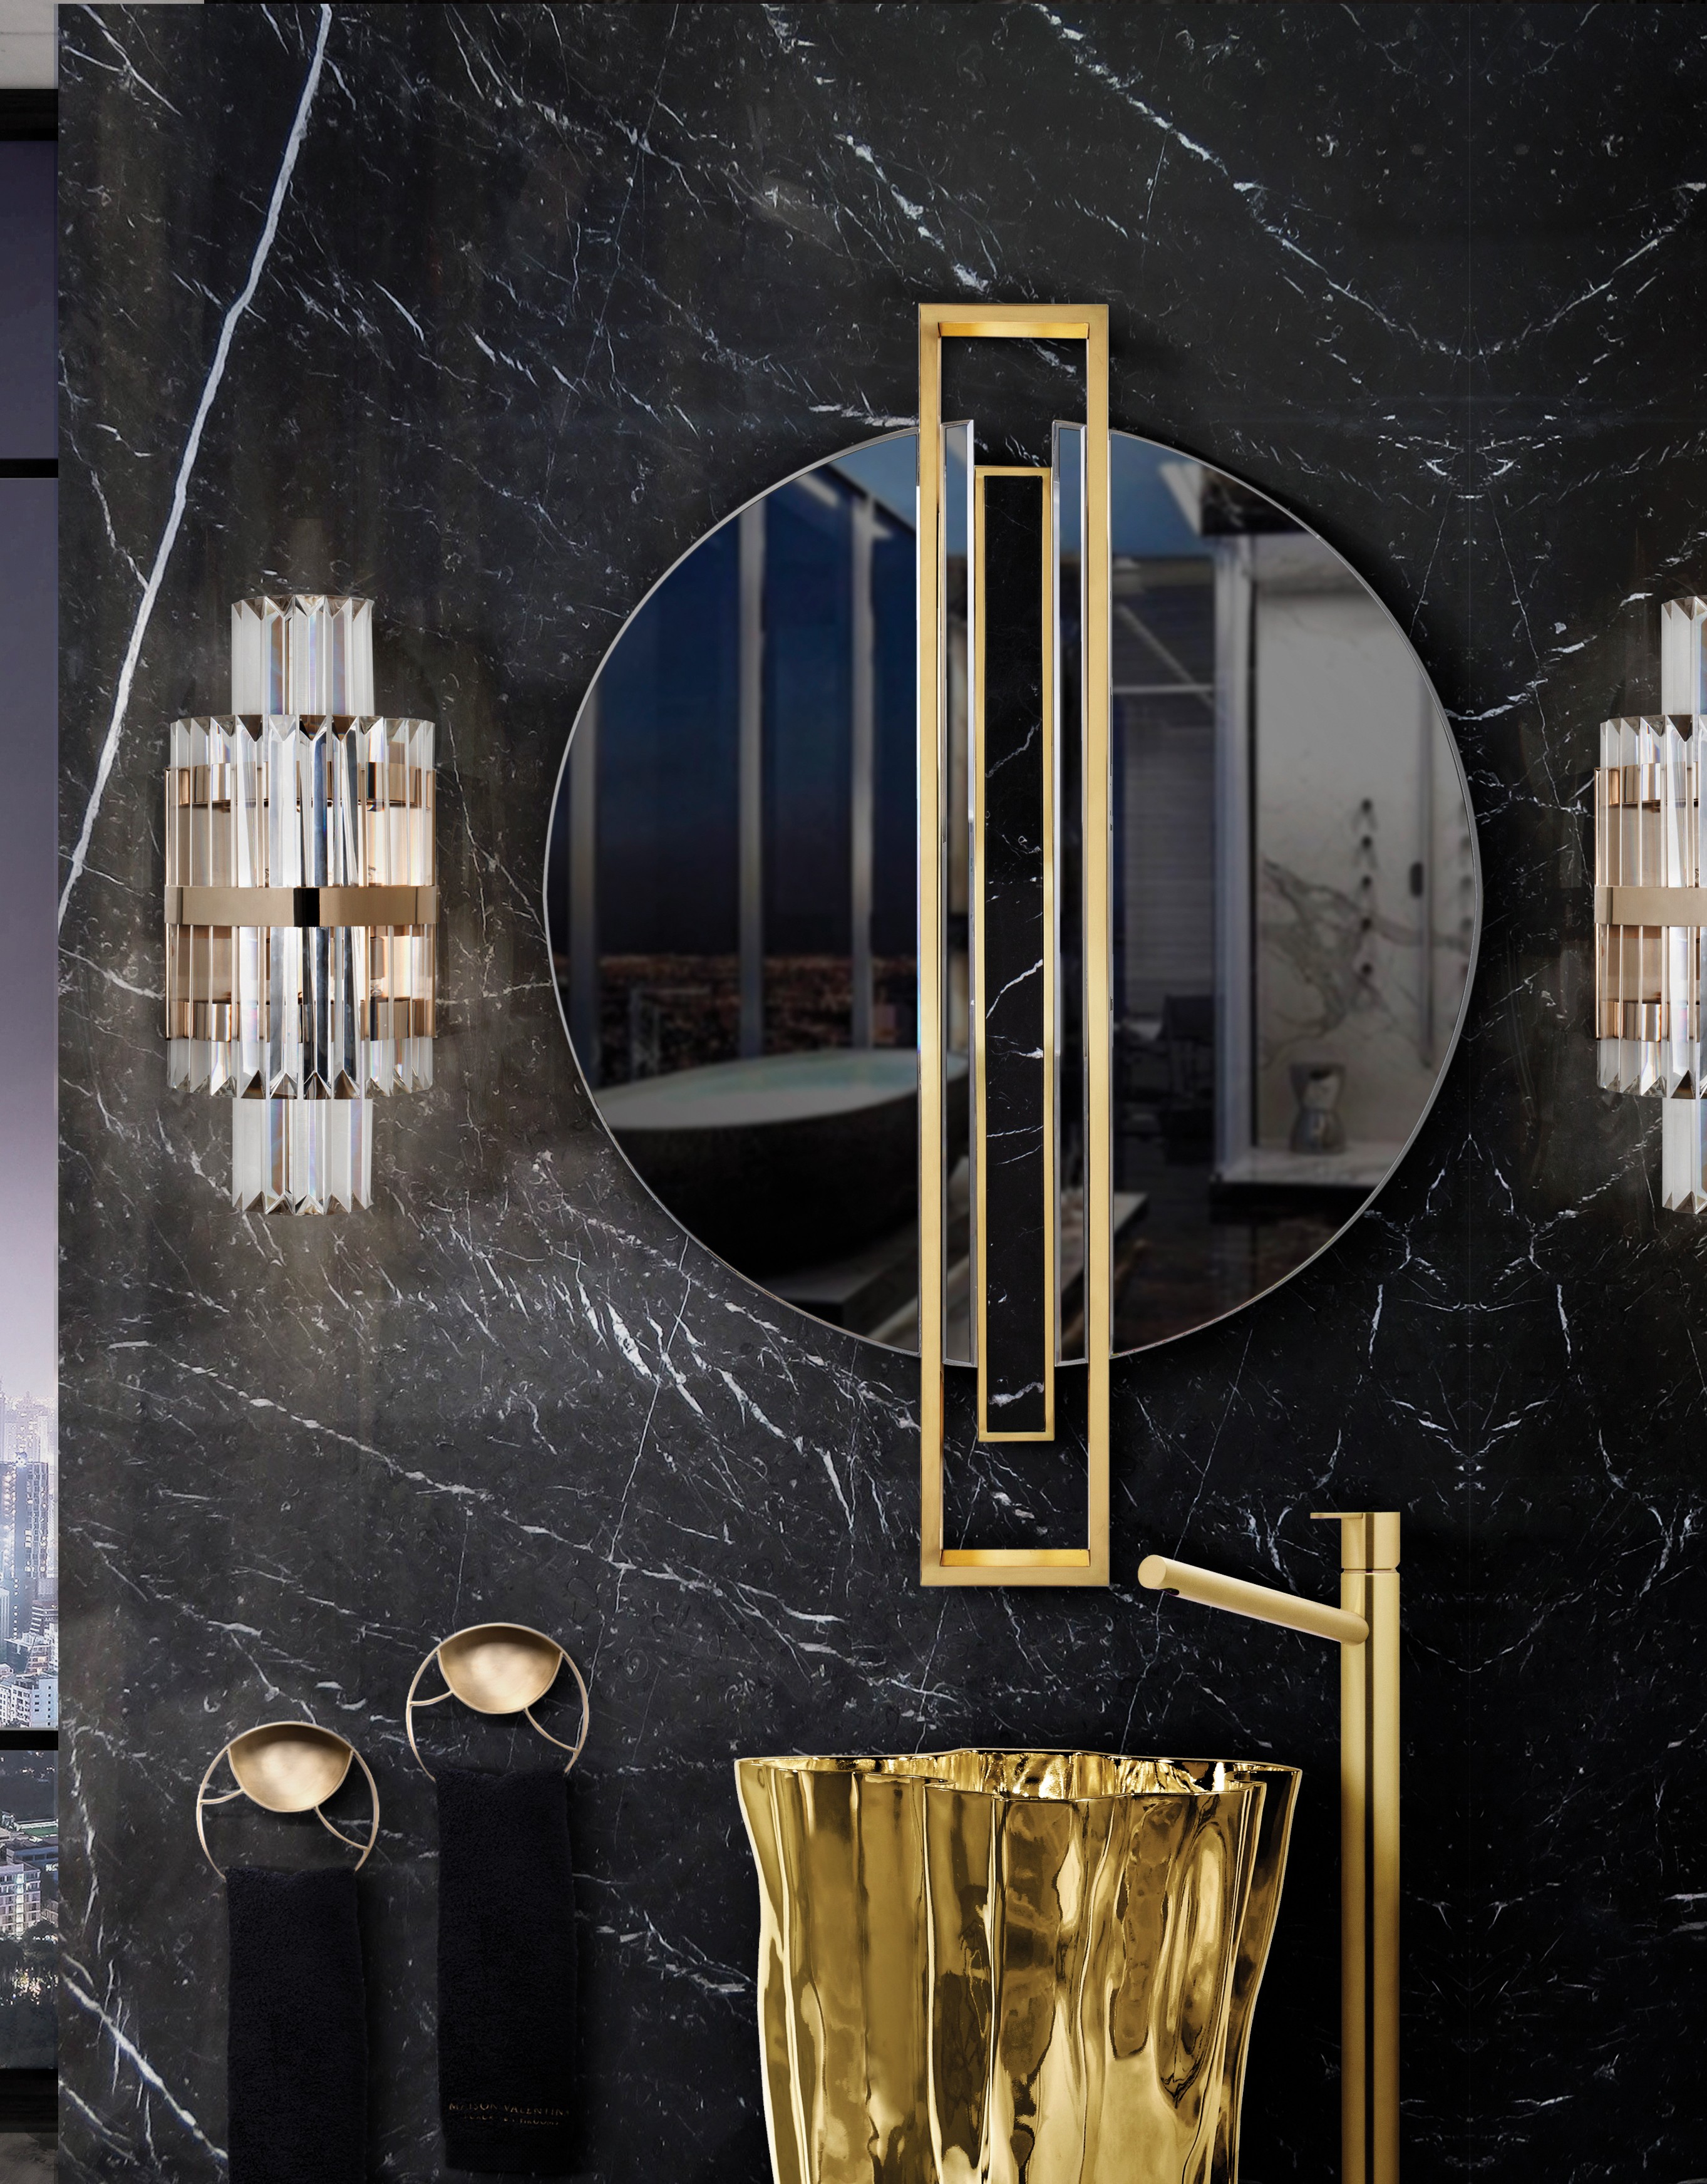 Mirror, Mirror On The Wall, Who Glows More From All? Mirror Mirror, Mirror On The Wall, Who Glows More From All? shield mirror takes central stage on dark guest bathroom